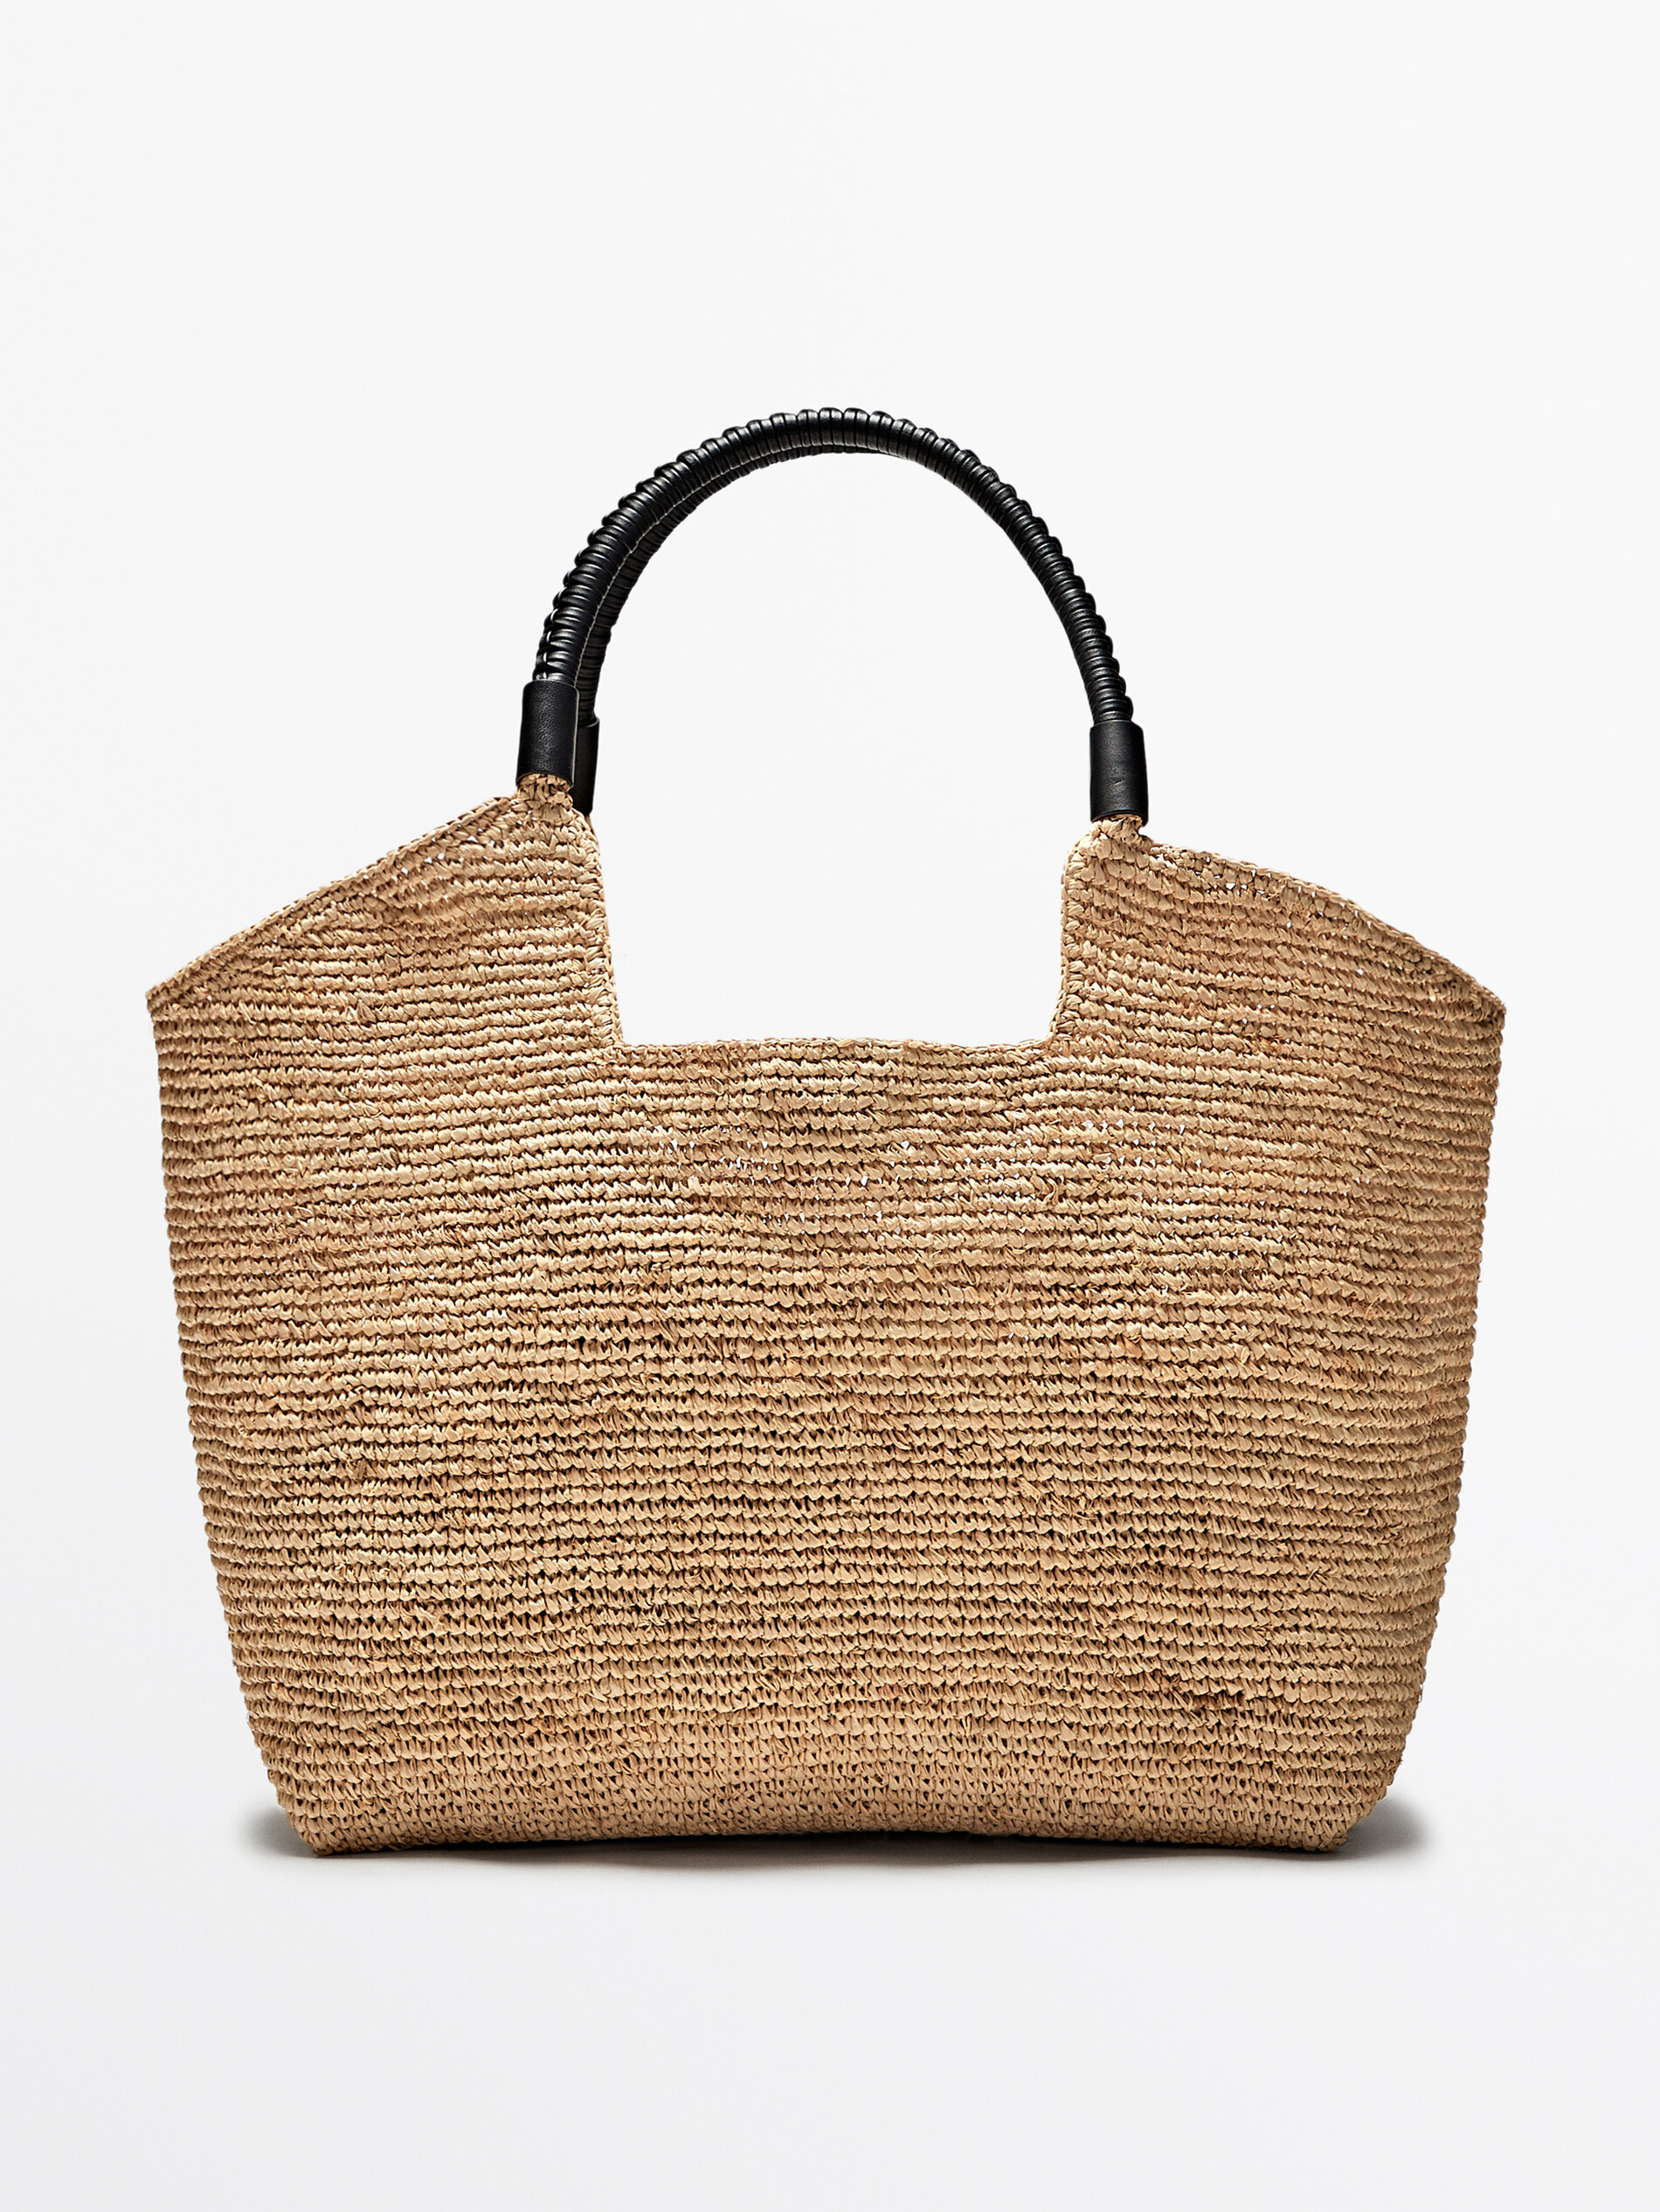 Raffia tote bag with leather handles